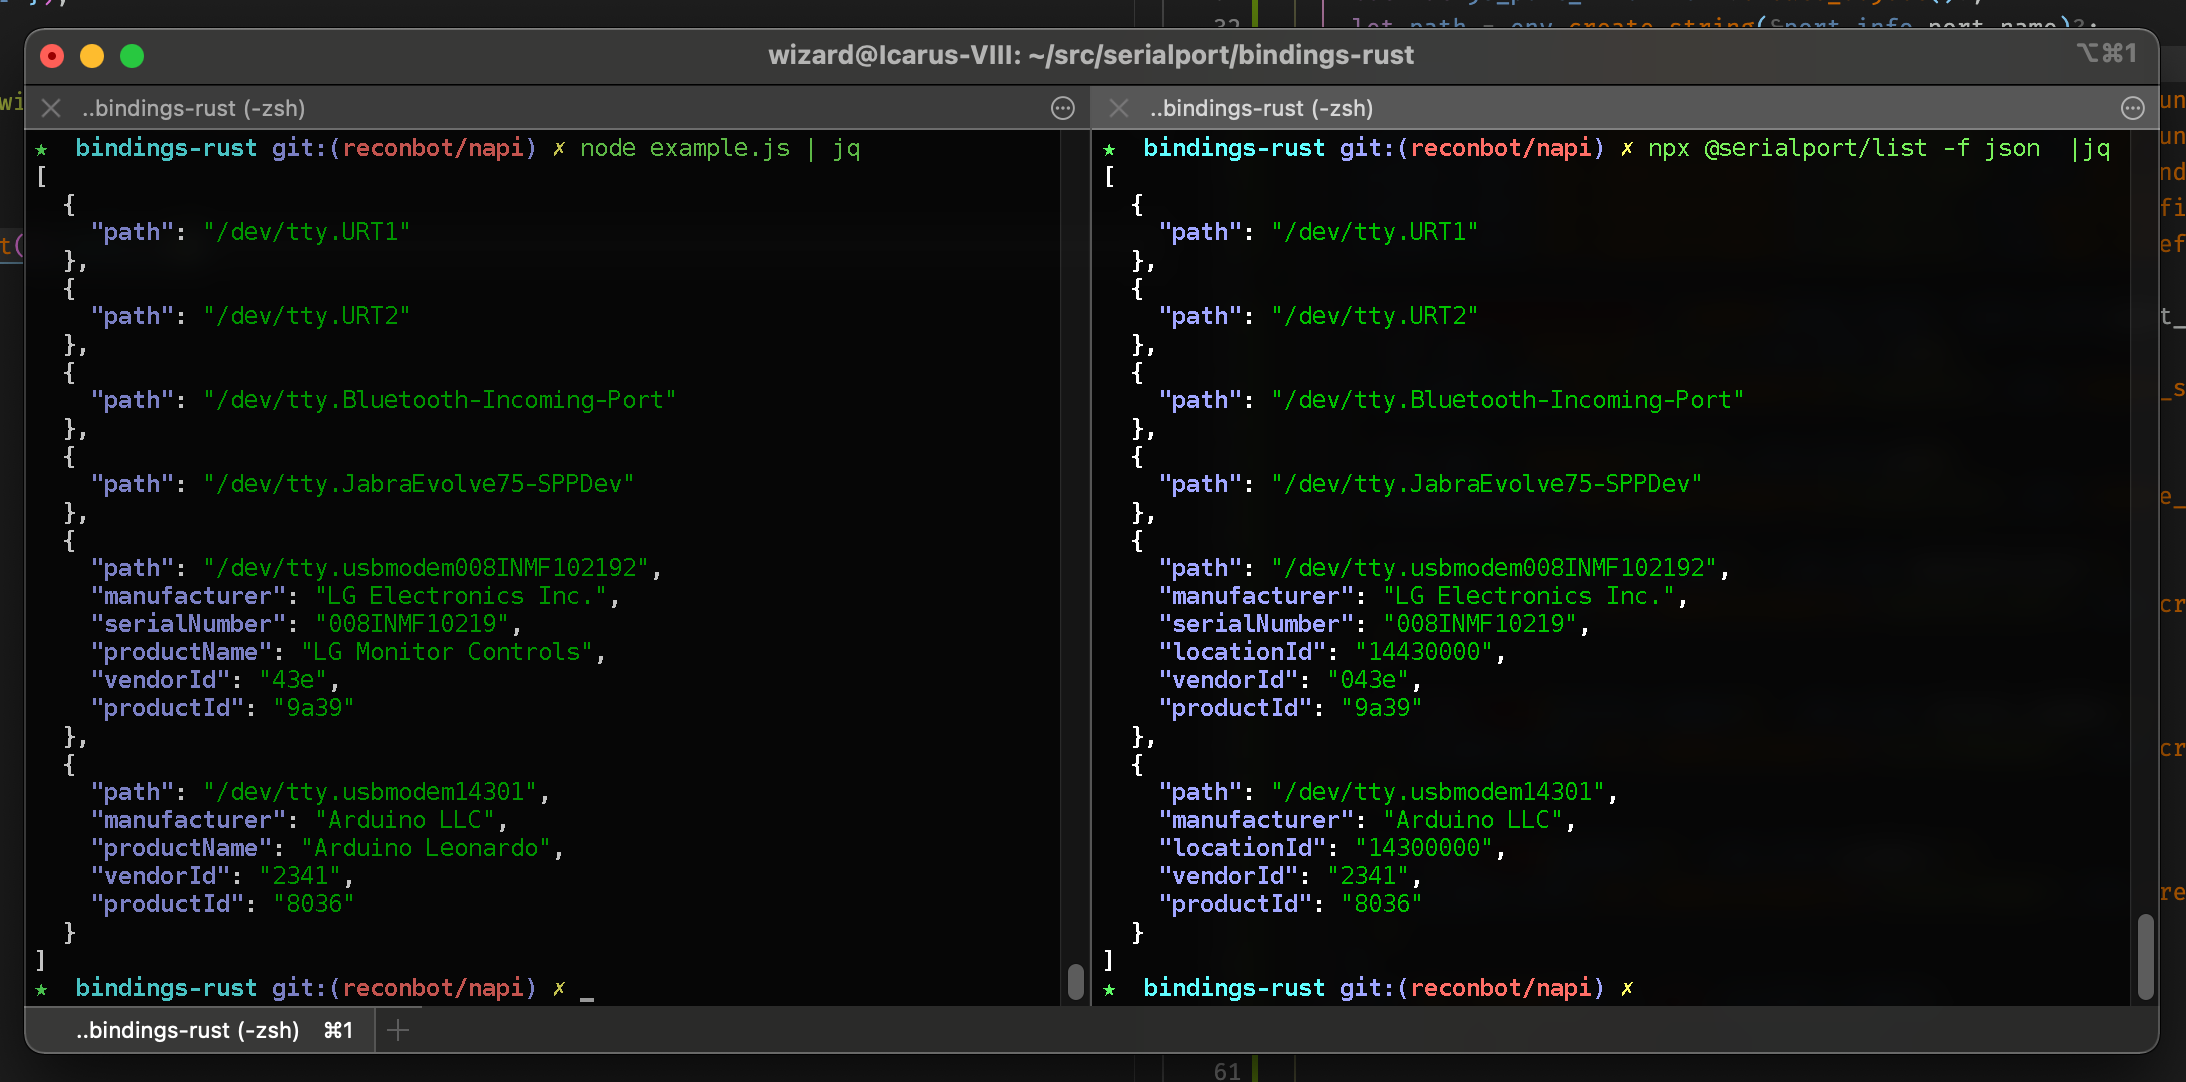 a side by side comparison of @serialport/list and my rust bindings prototype